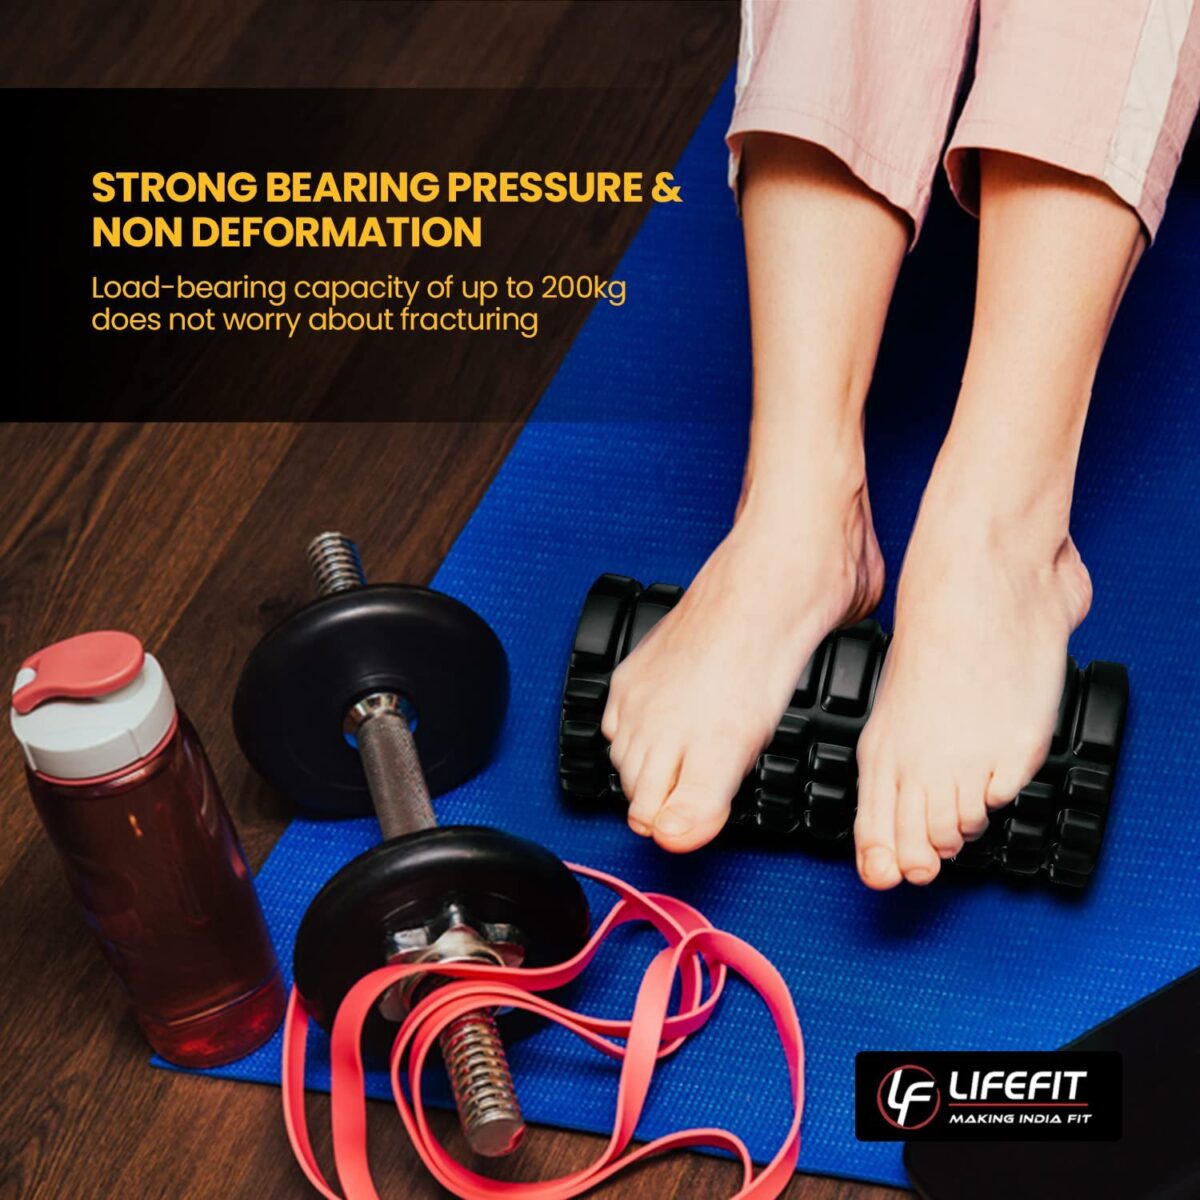 A foam roller for exercise with strong bearing pressure and no additional information, sold by Life Fit India.